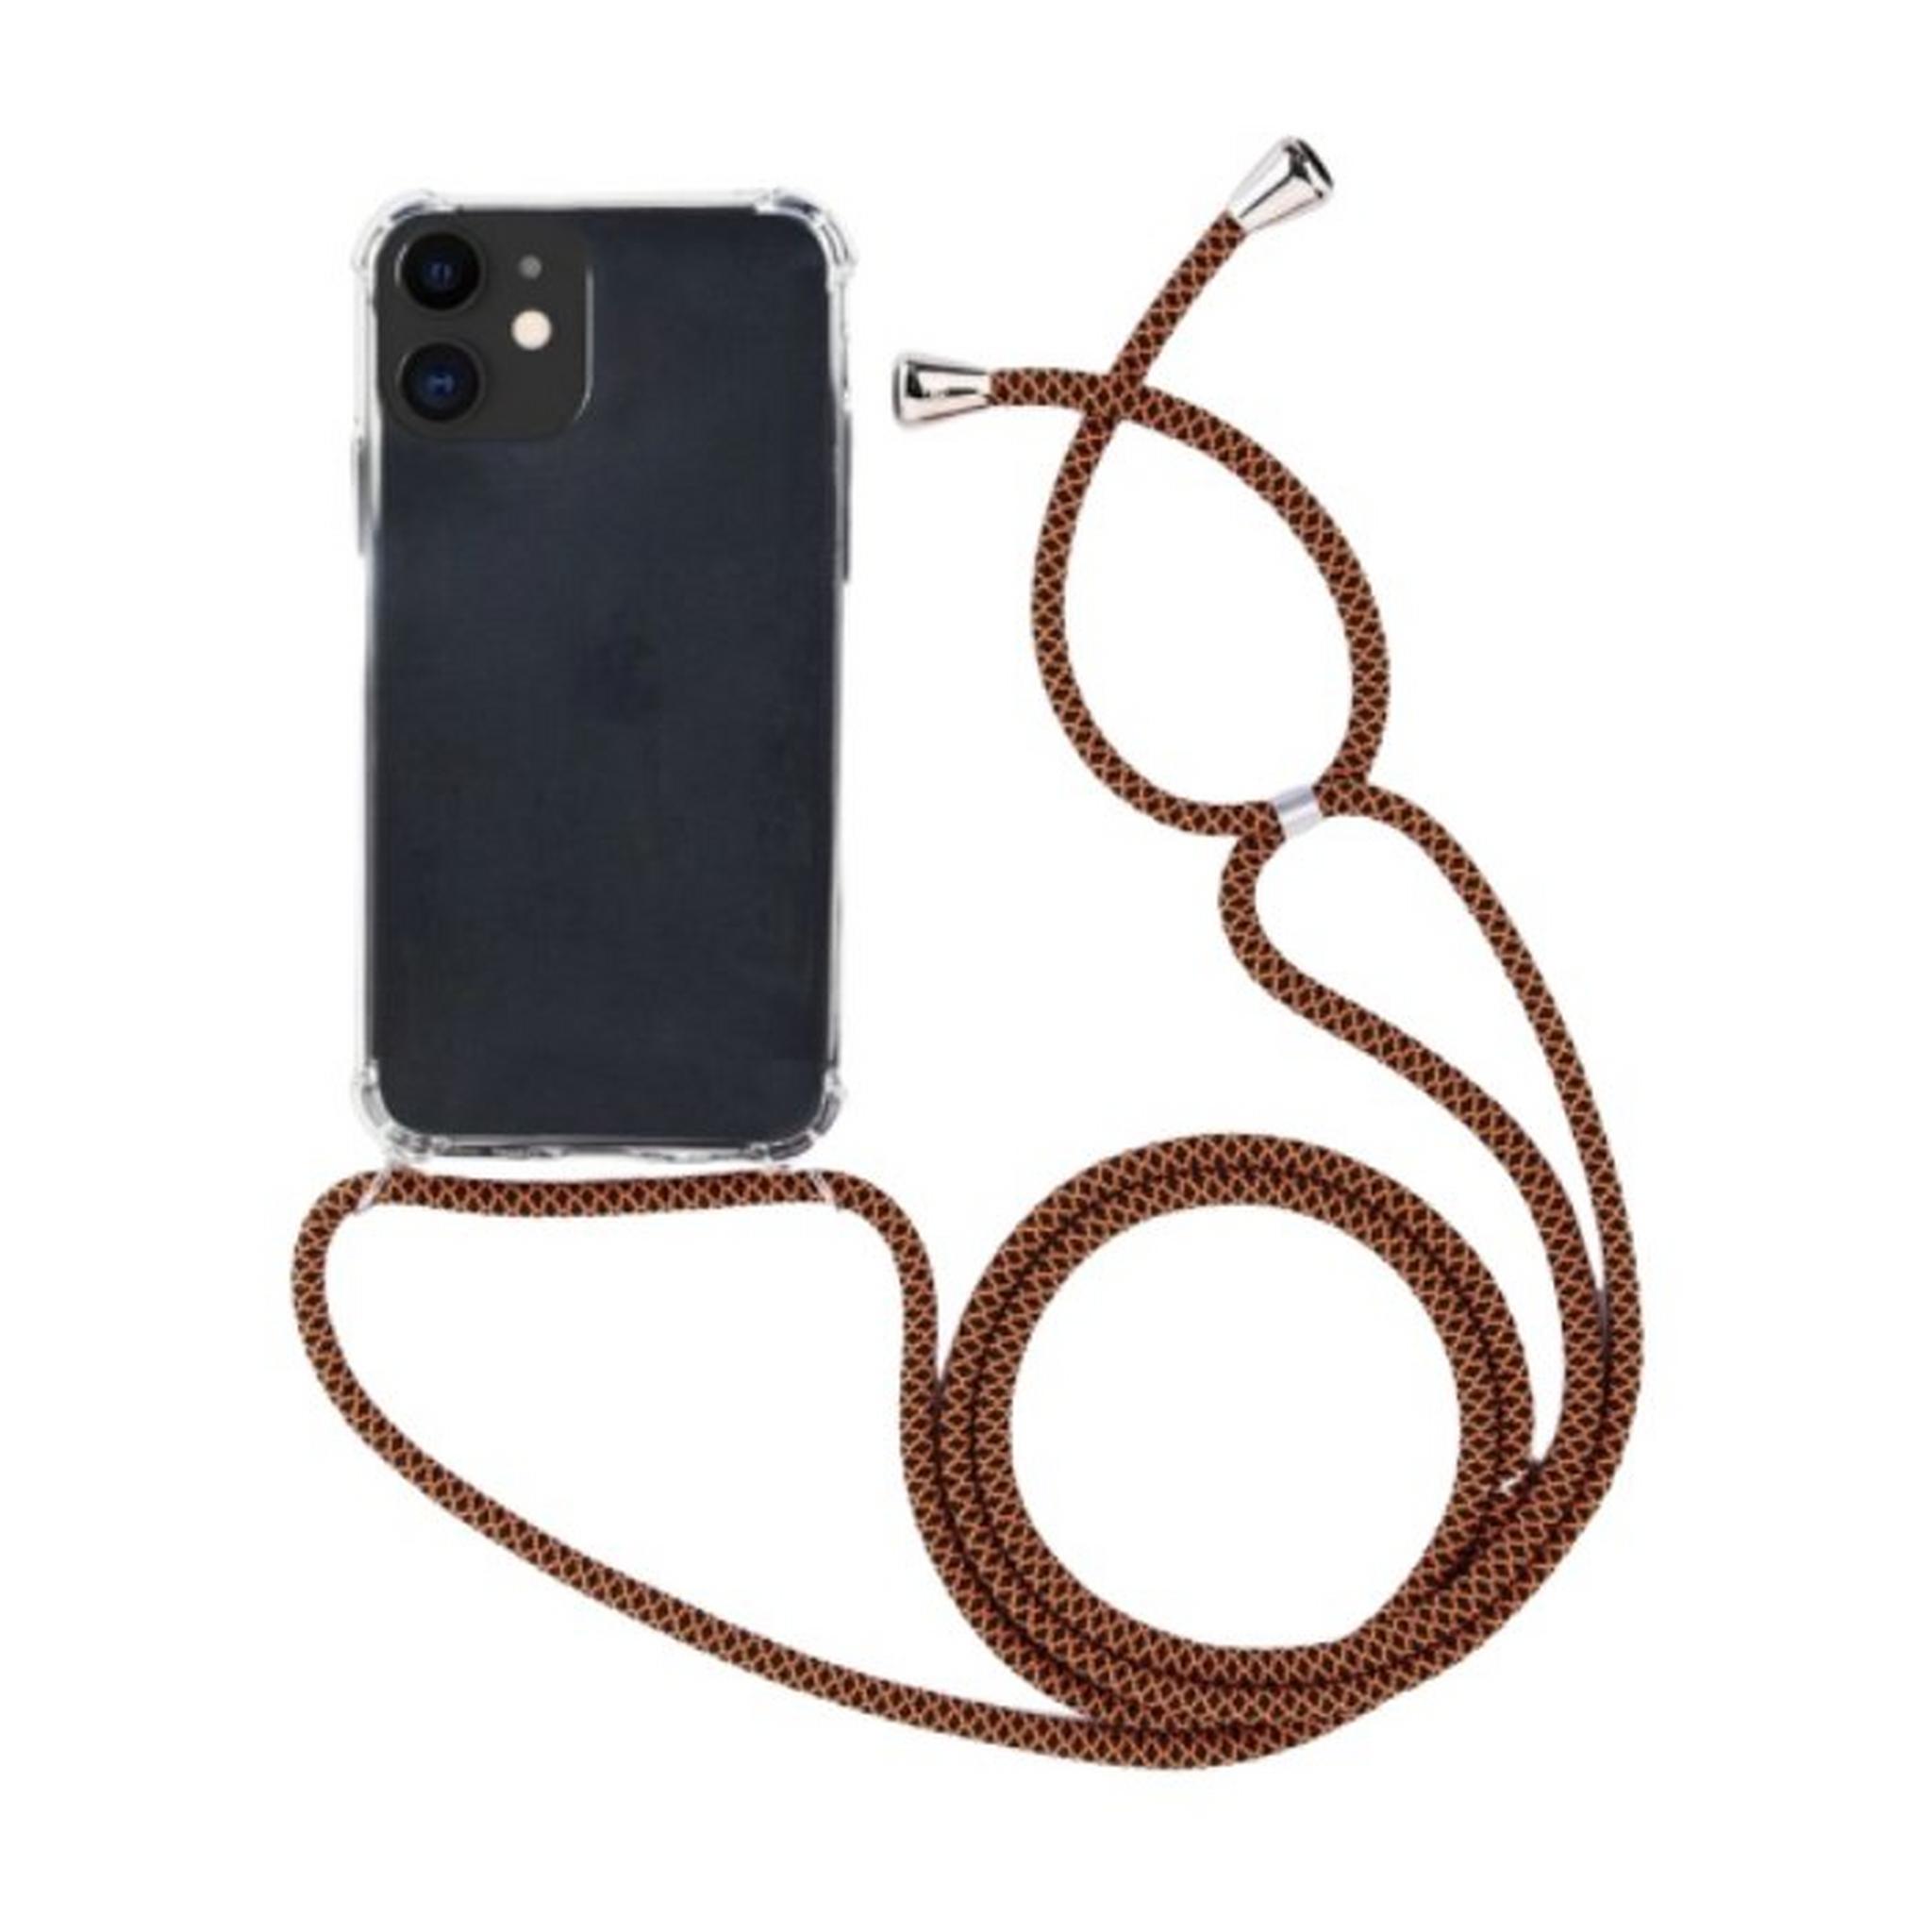 EQ Necklace String iPhone 11 Case - Green Strap